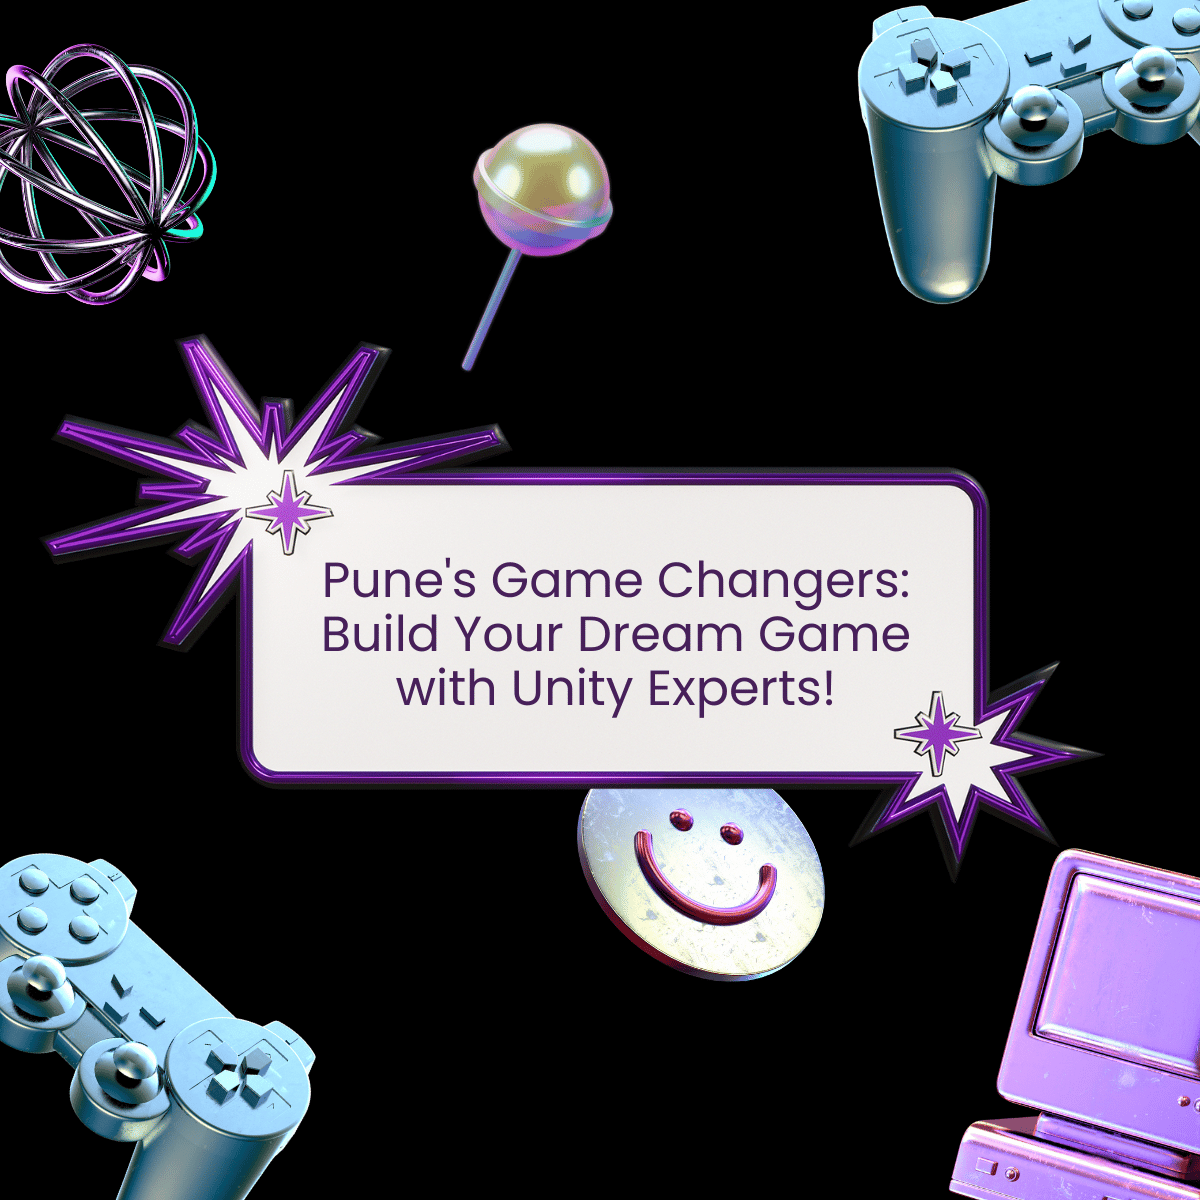 Pune's Game Changers: Build Your Dream Game with Unity Experts!